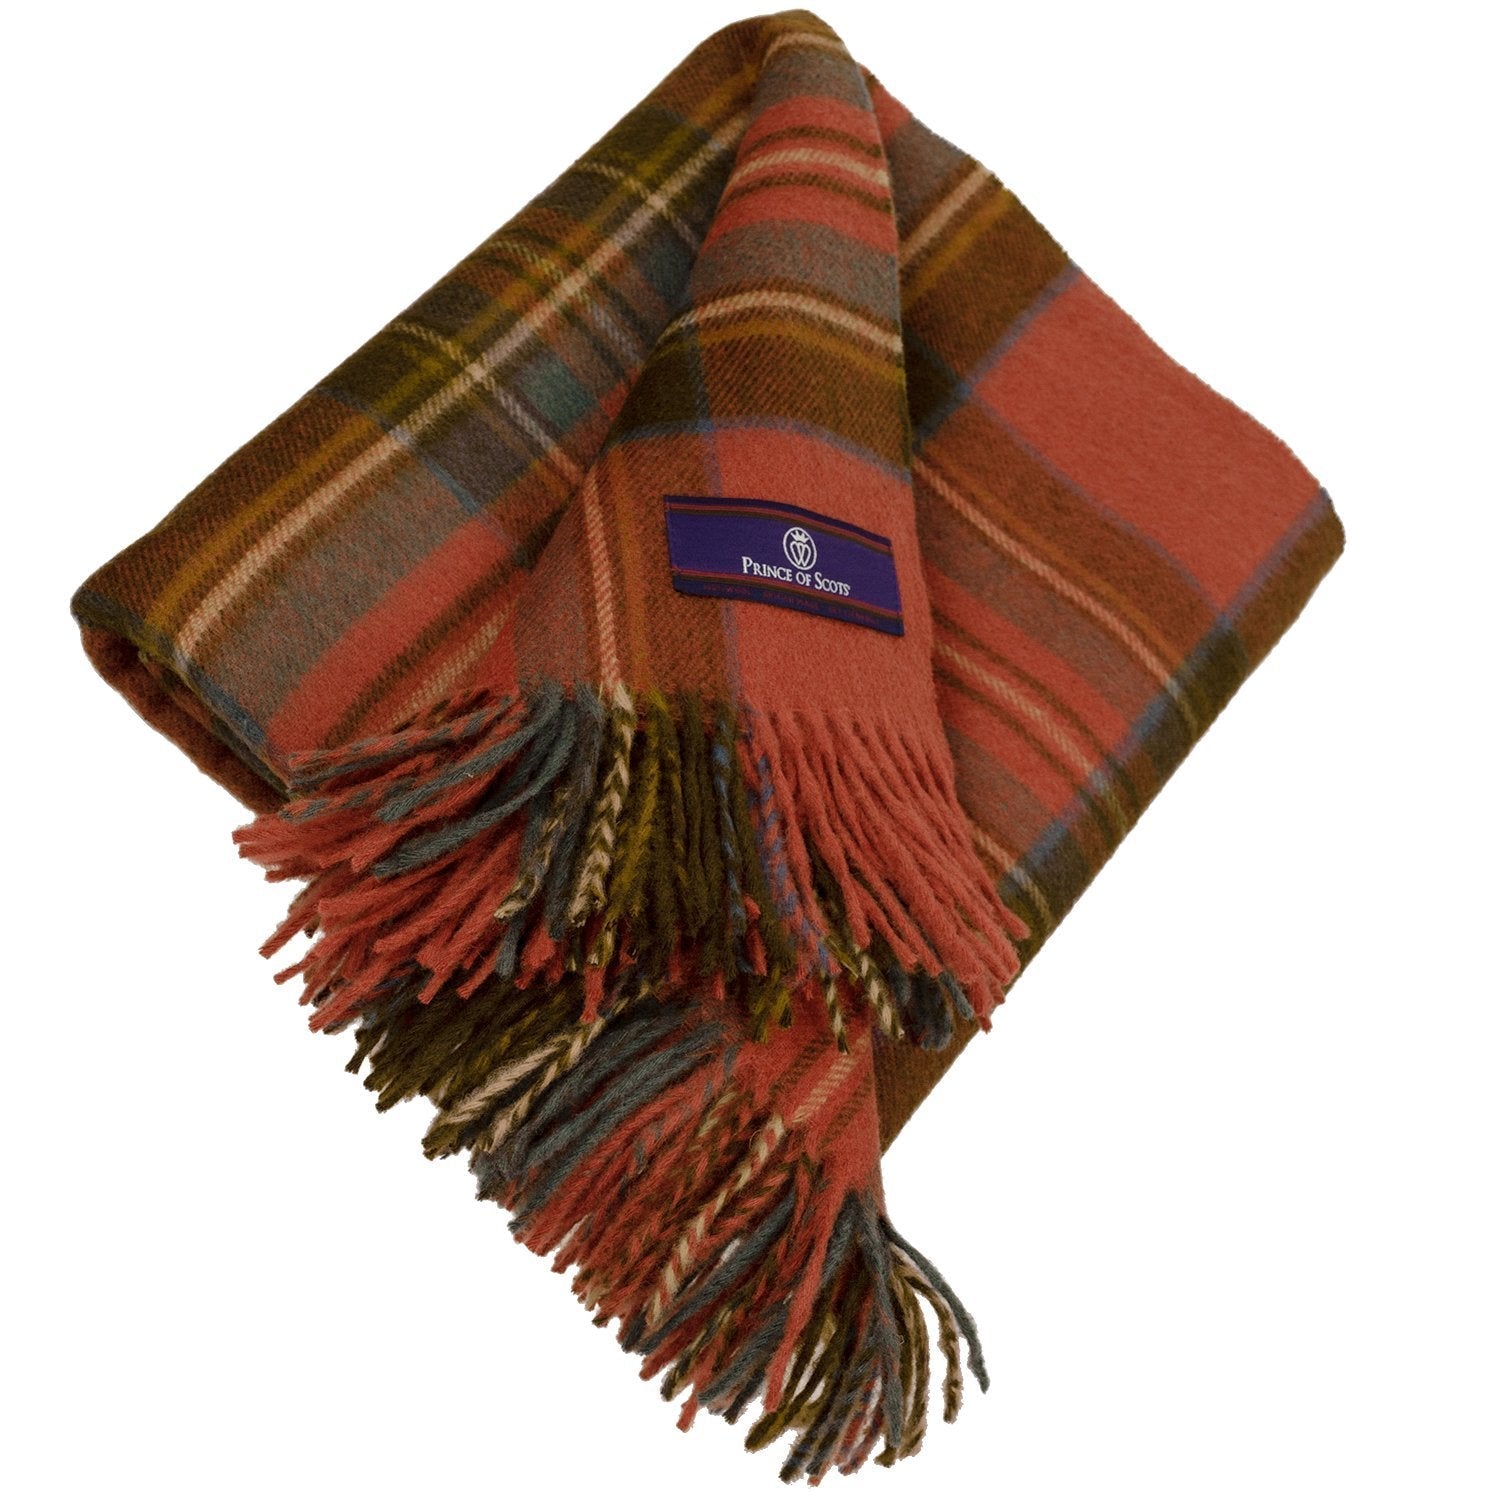 Prince of Scots Highland Tweed Merino Wool Throw ~ Antique Royal Stewart ~-Throws and Blankets-Prince of Scots-00810032750657-J400002-Prince of Scots